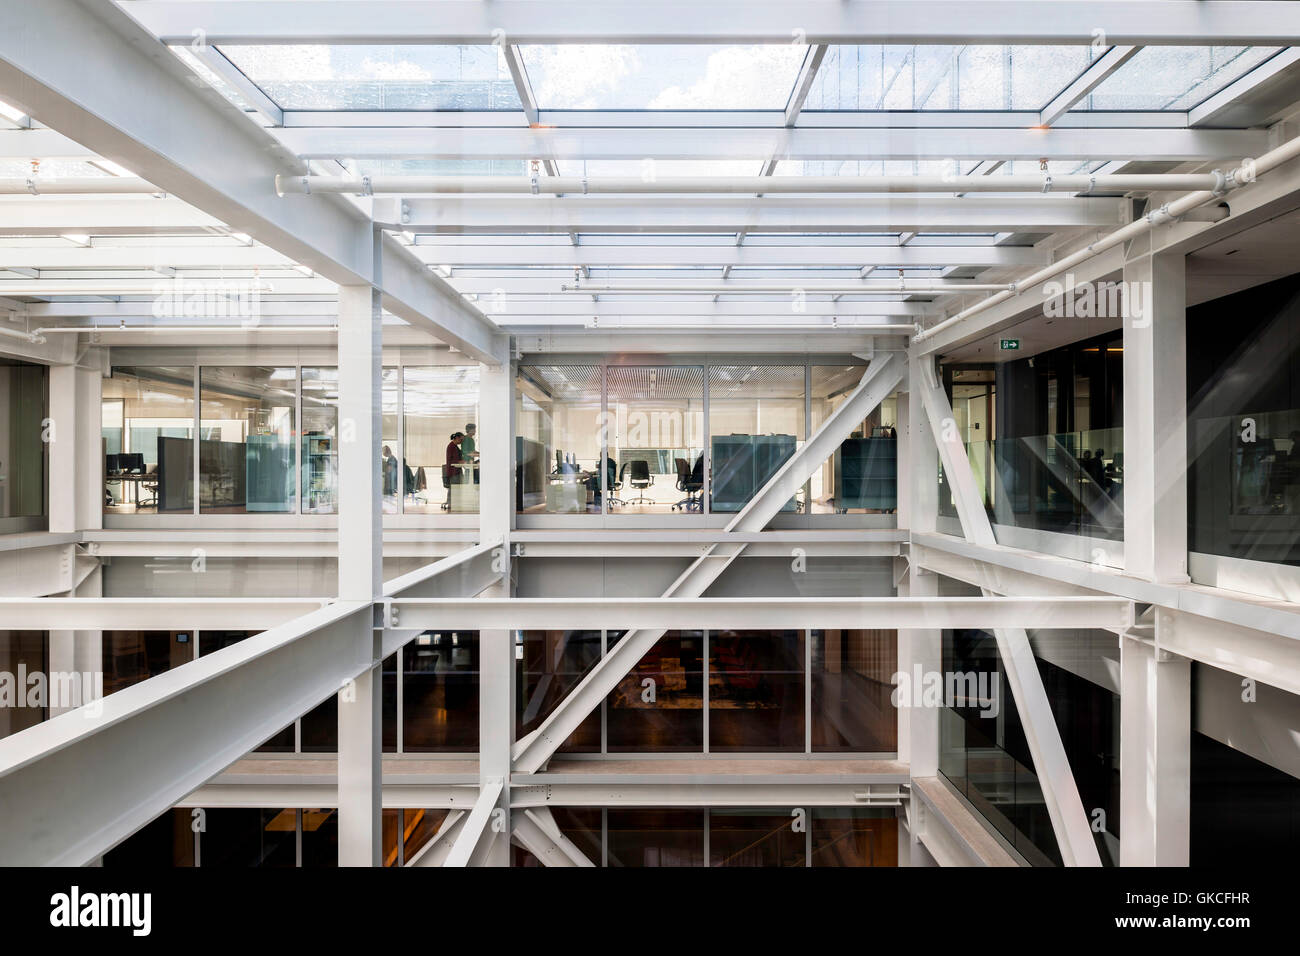 Interior view of of white structural system. Timmerhuis, Rotterdam, Netherlands. Architect: OMA Rem Koolhaas, 2015. Stock Photo